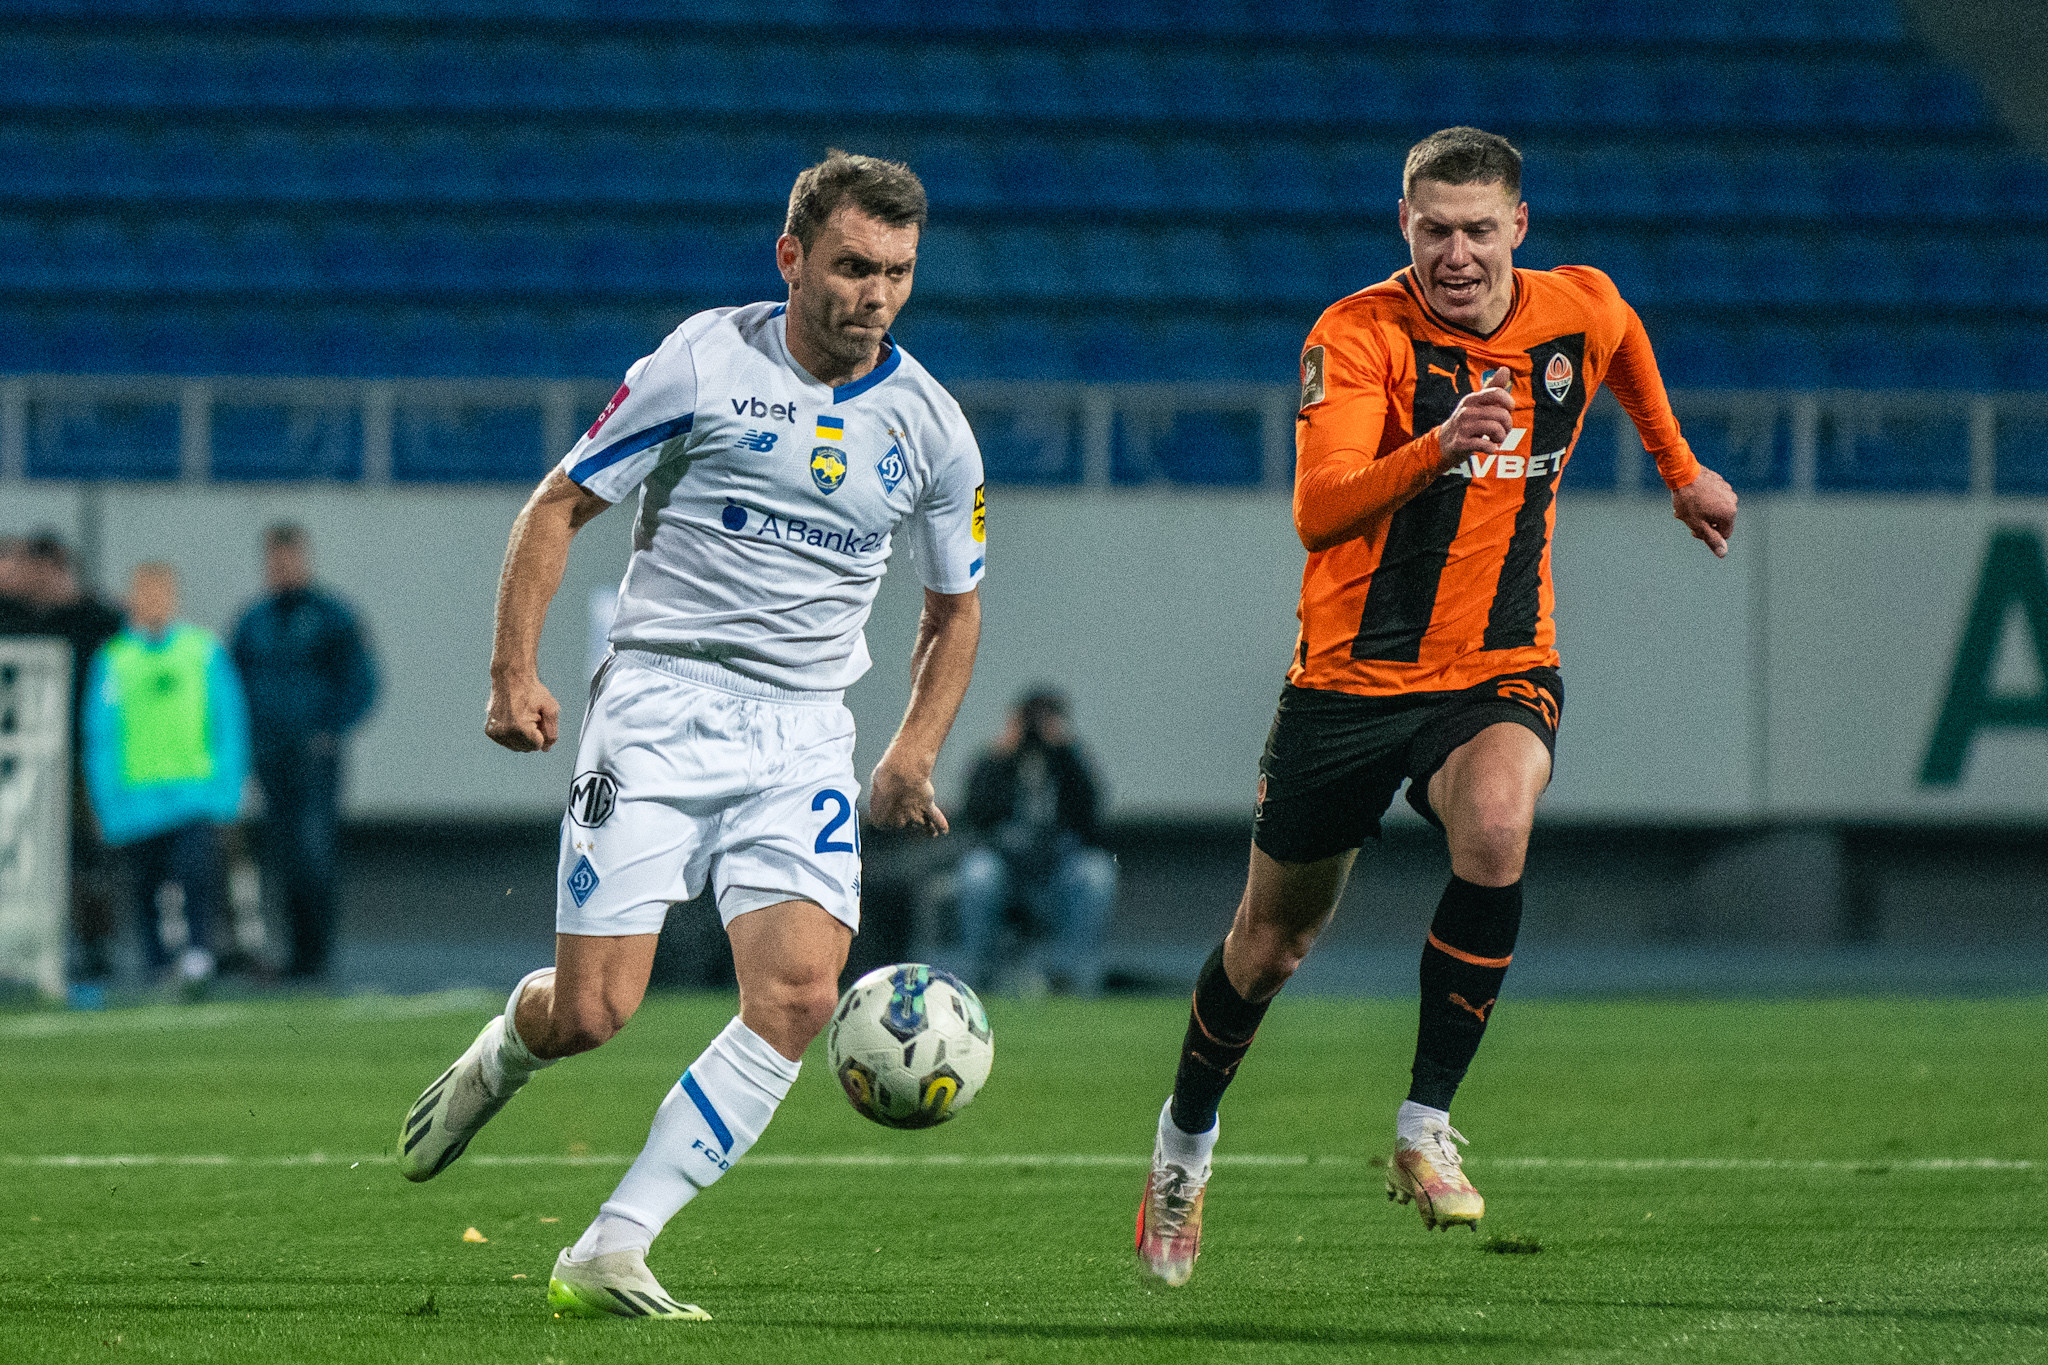 Olexandr Karavayev: “We found out about Lucescu’s resignation after the game”